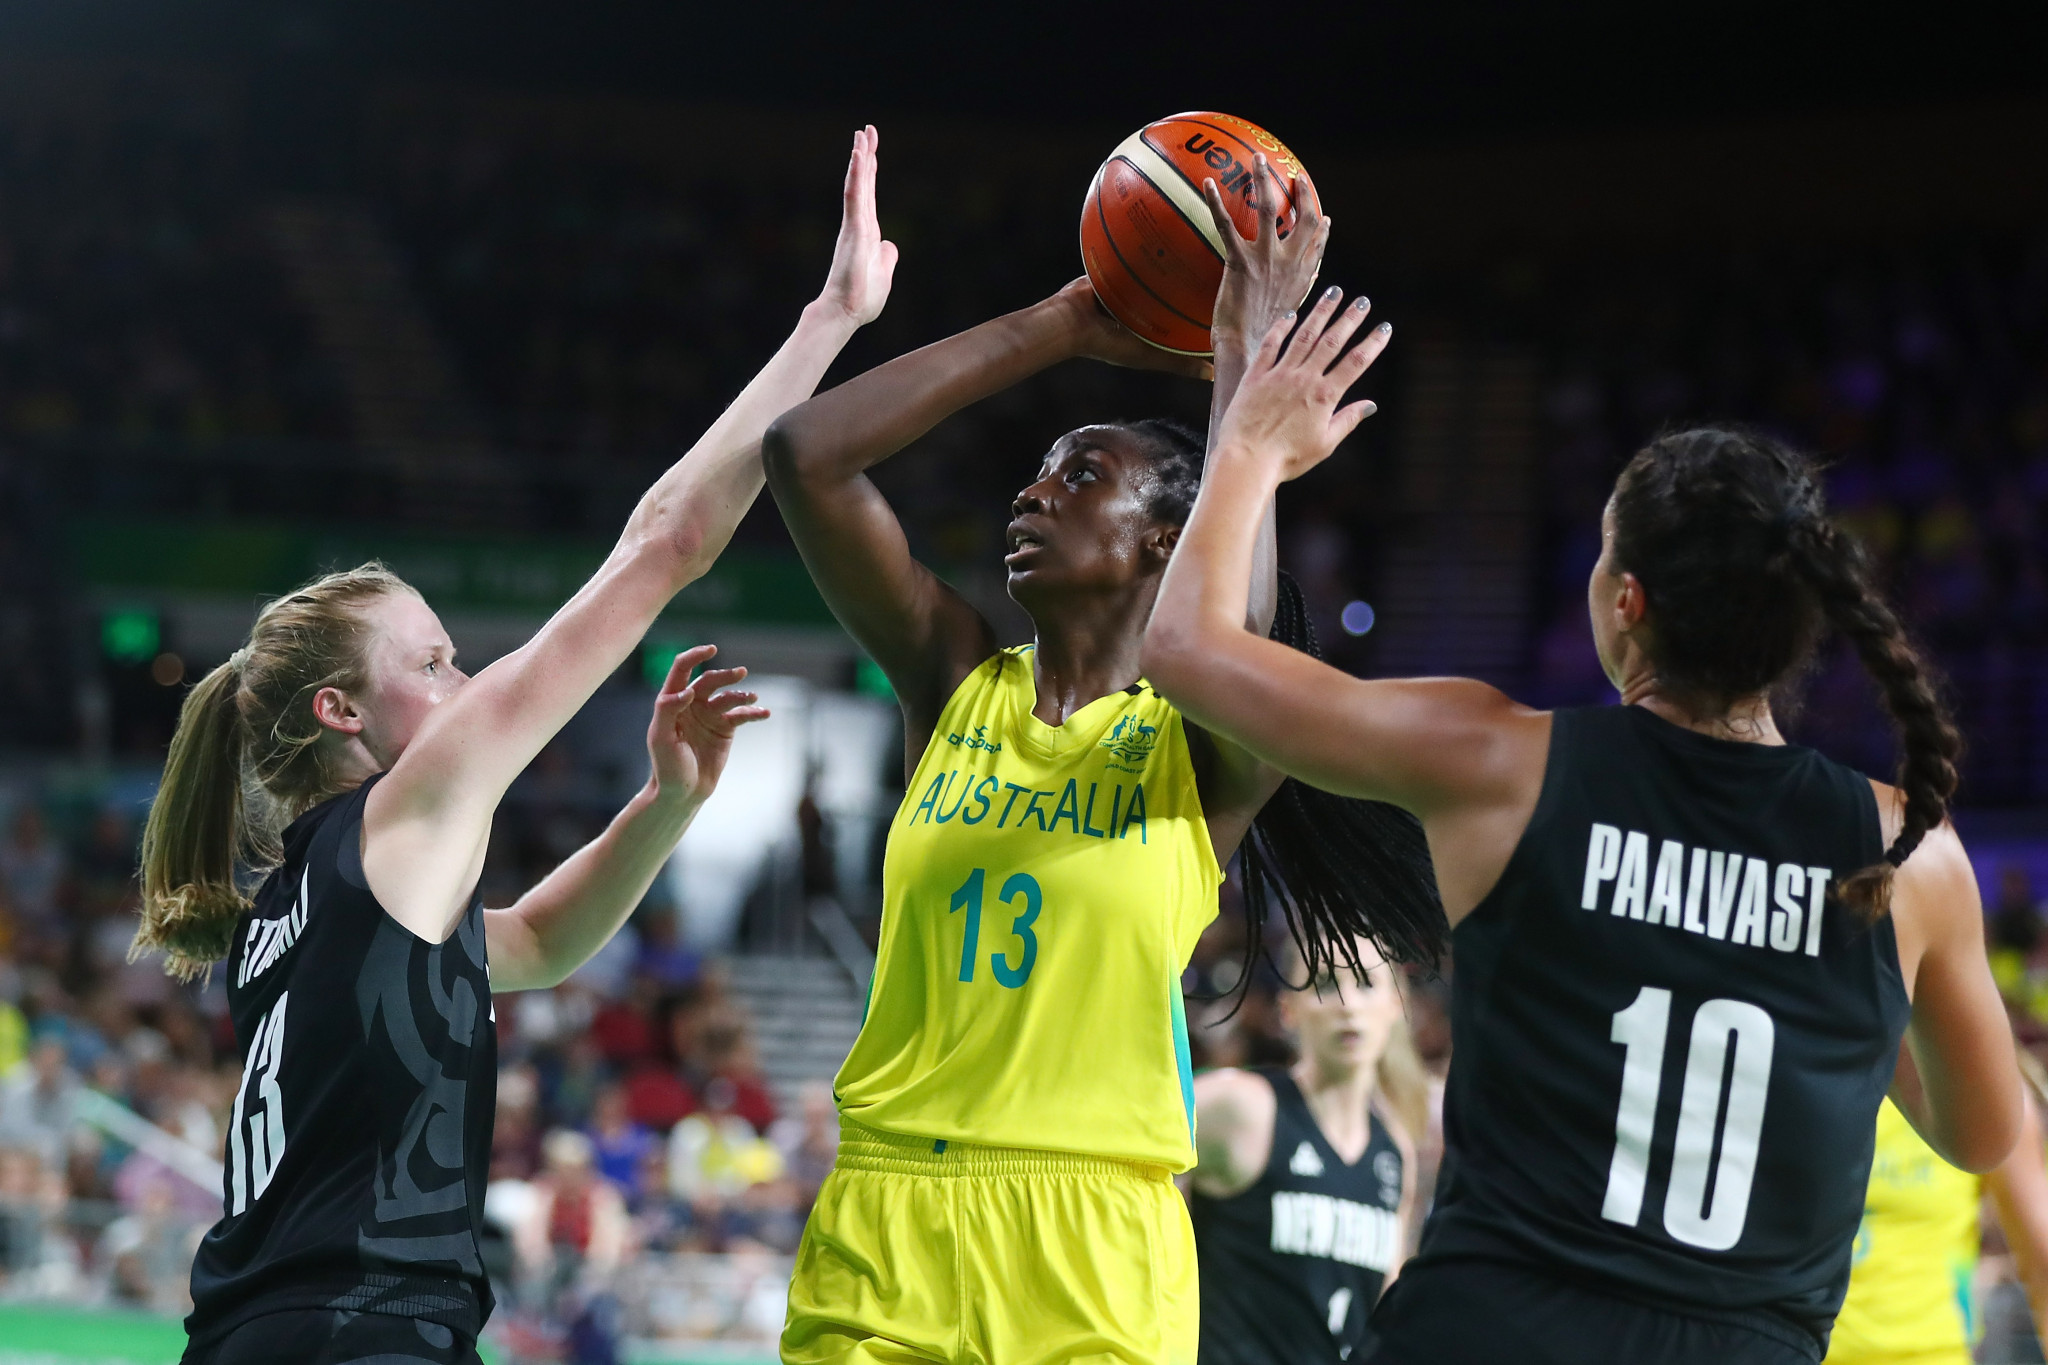 Ezi Magbegor has been selected to compete in Australia's women's basketball team at Naples 2019 ©Getty Images